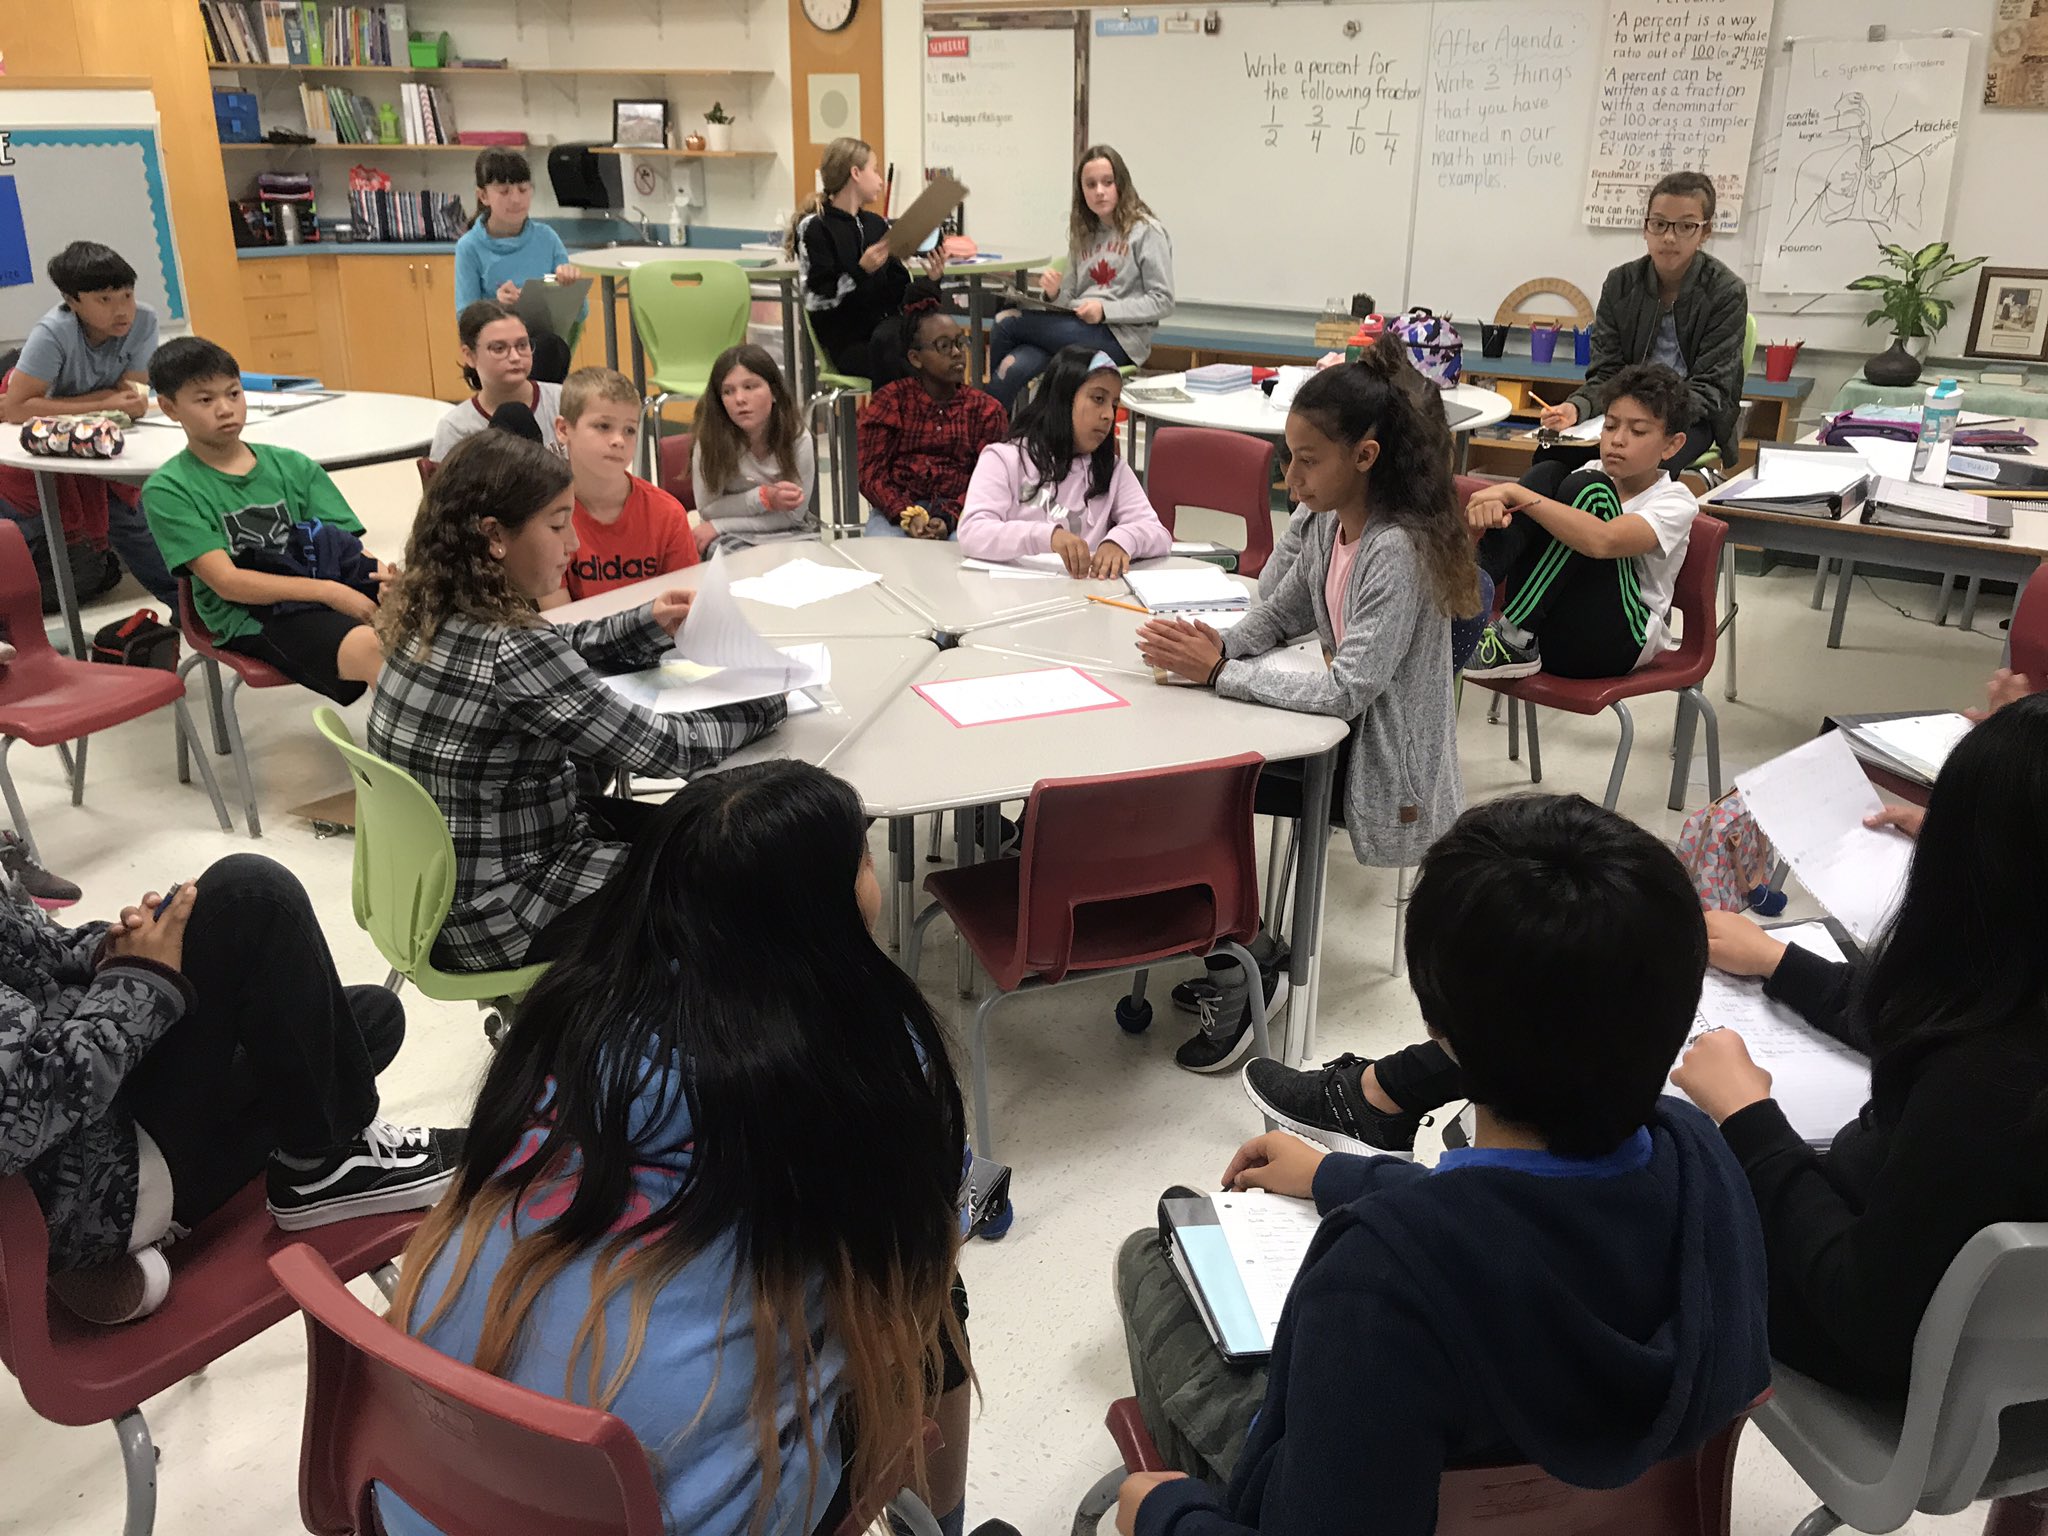 Ms O'Shaughnessy on Twitter: "Fishbowl debate day 1 update: two groups have  done their inner circle debate.The outer circle members were participating  by taking notes and asking questions. I saw some potential